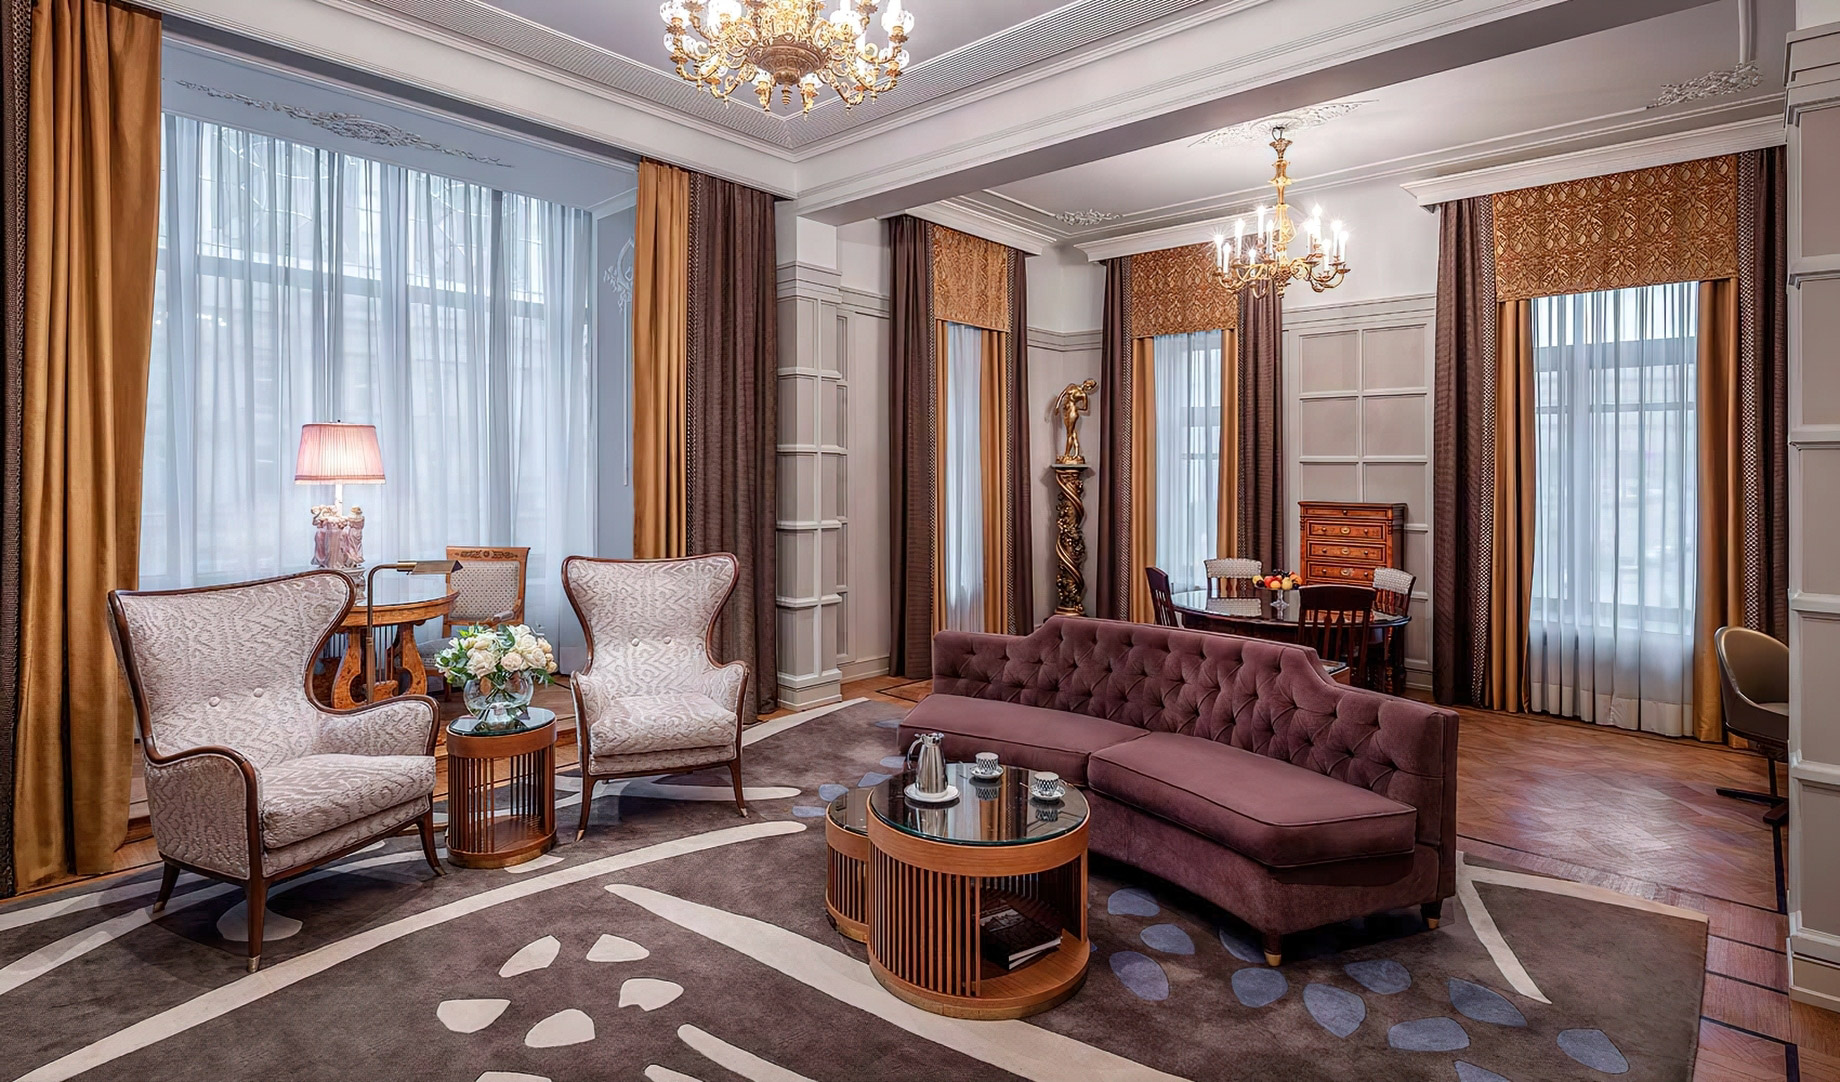 Metropol Hotel Moscow - Moscow, Russia - Premier Suite